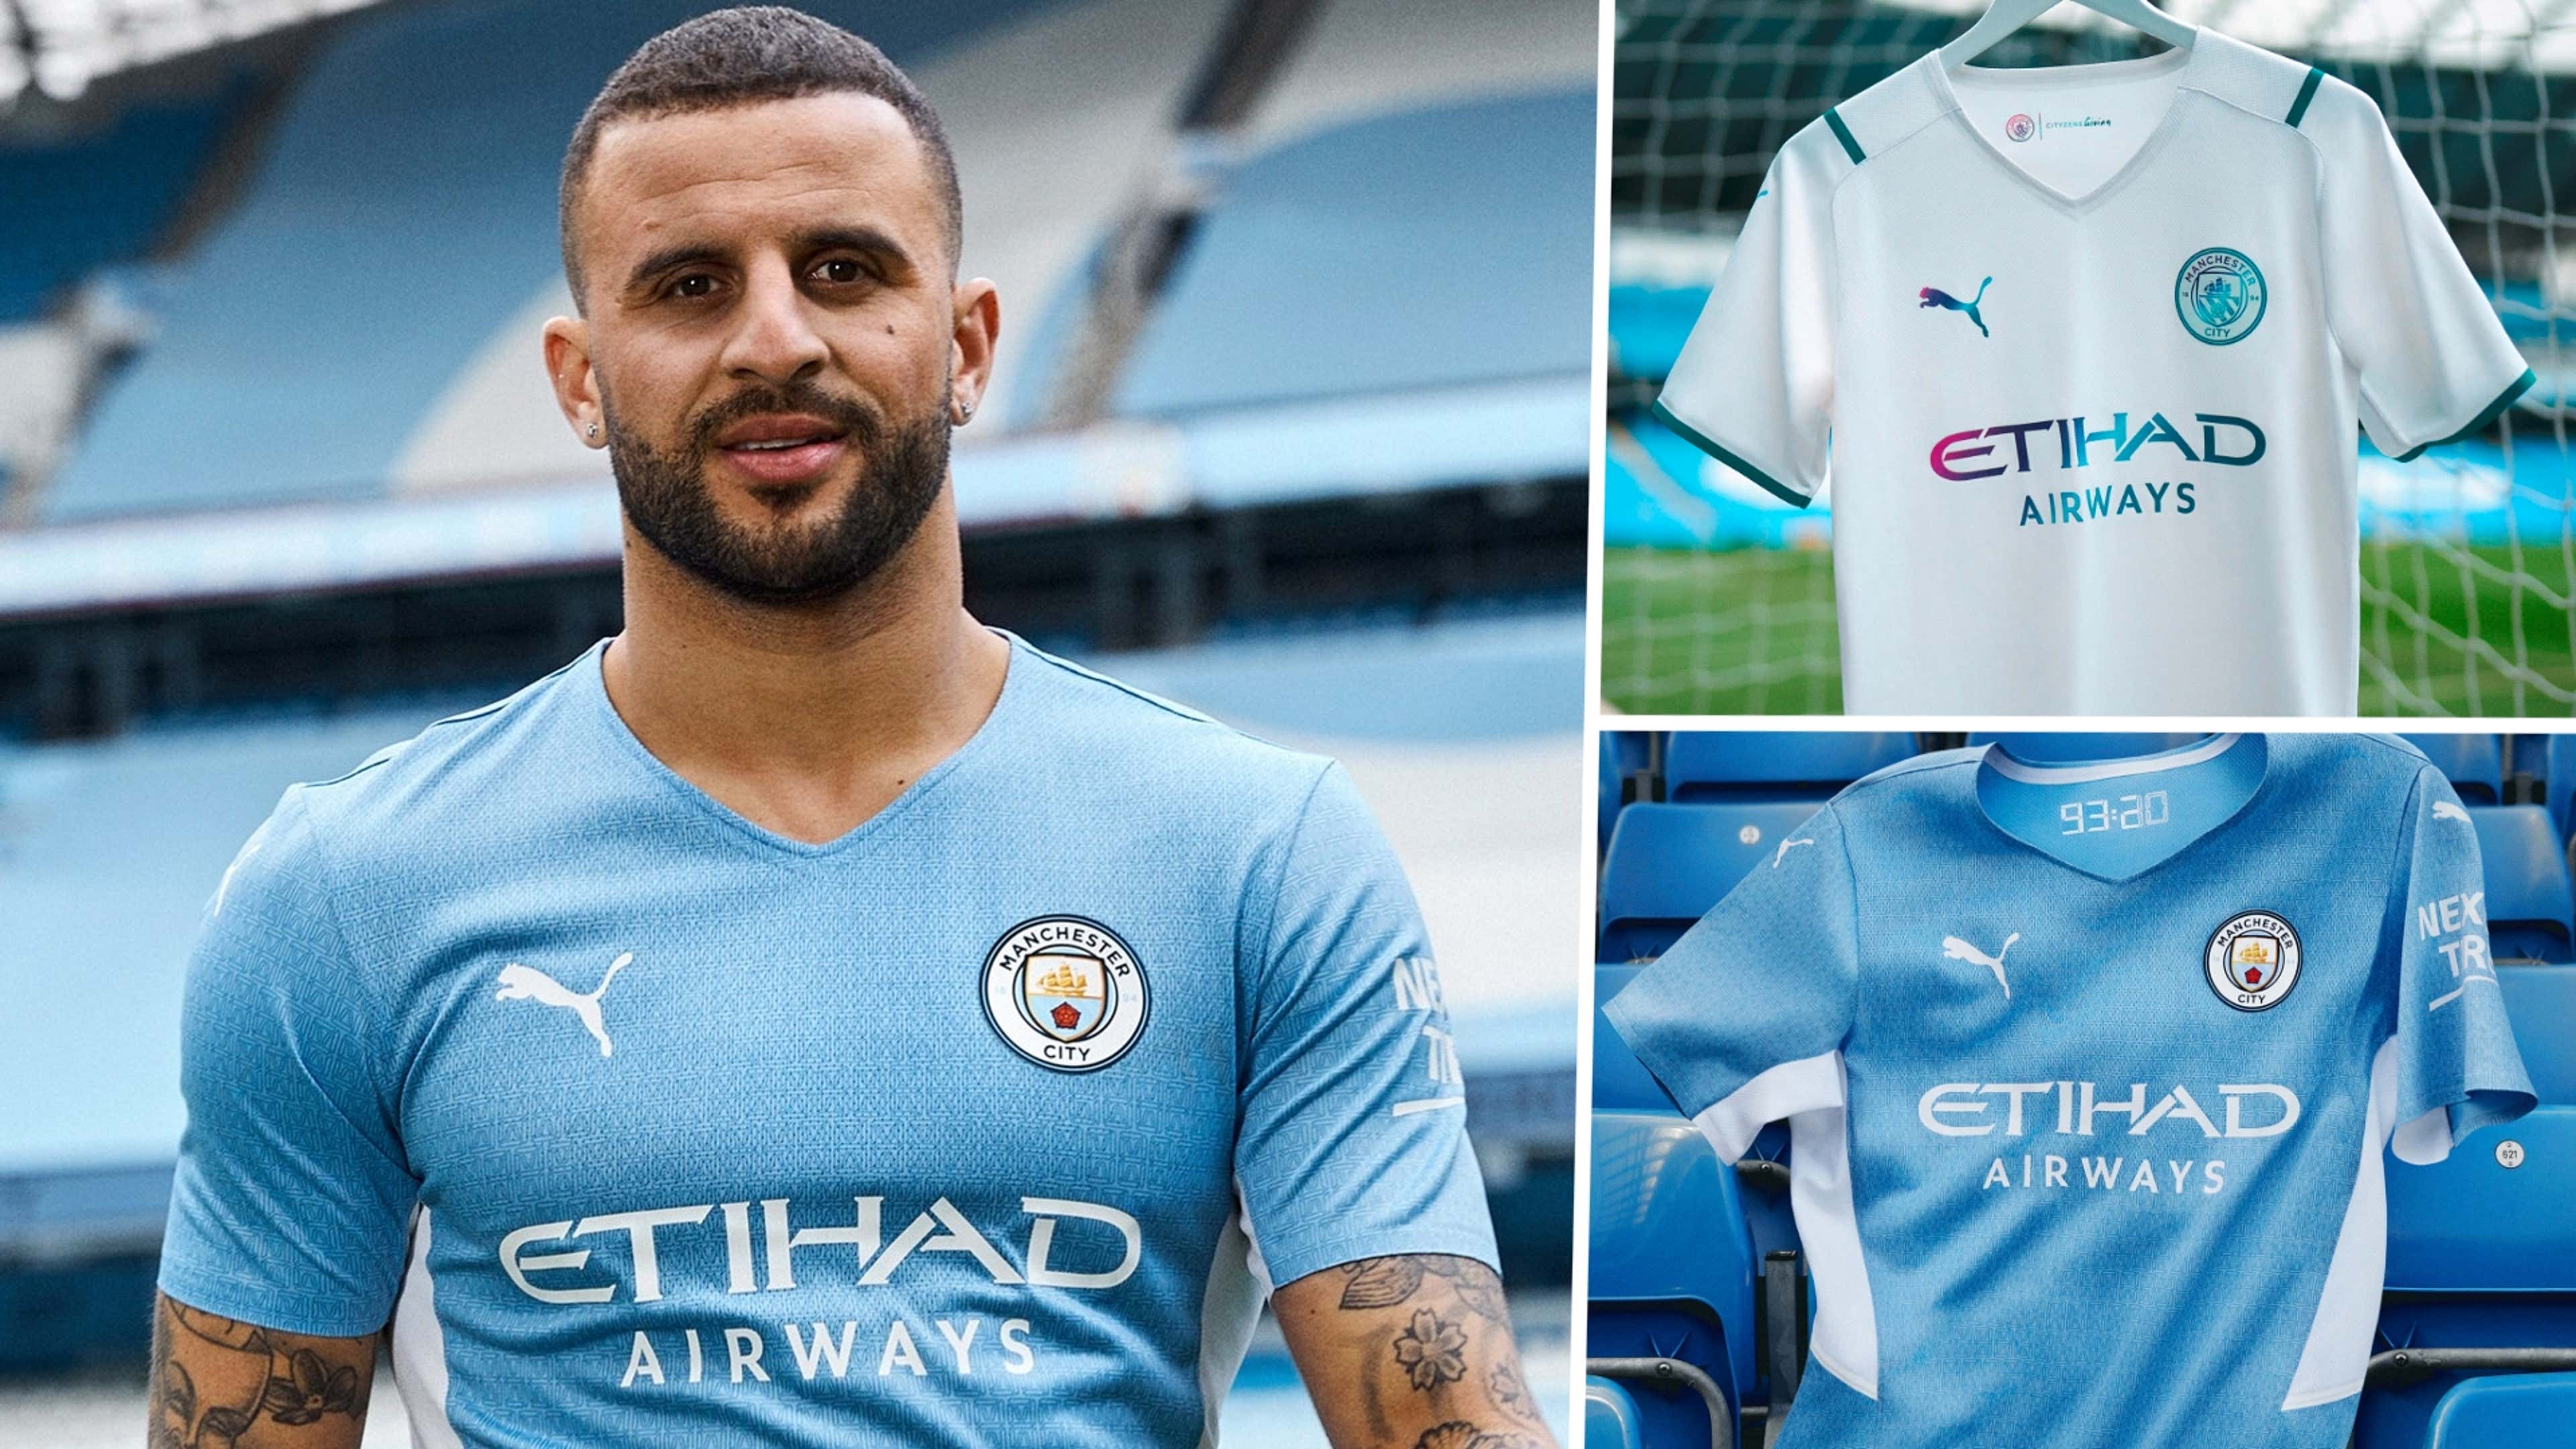 Man City 2021-22 kit: New home and away jersey styles & release dates